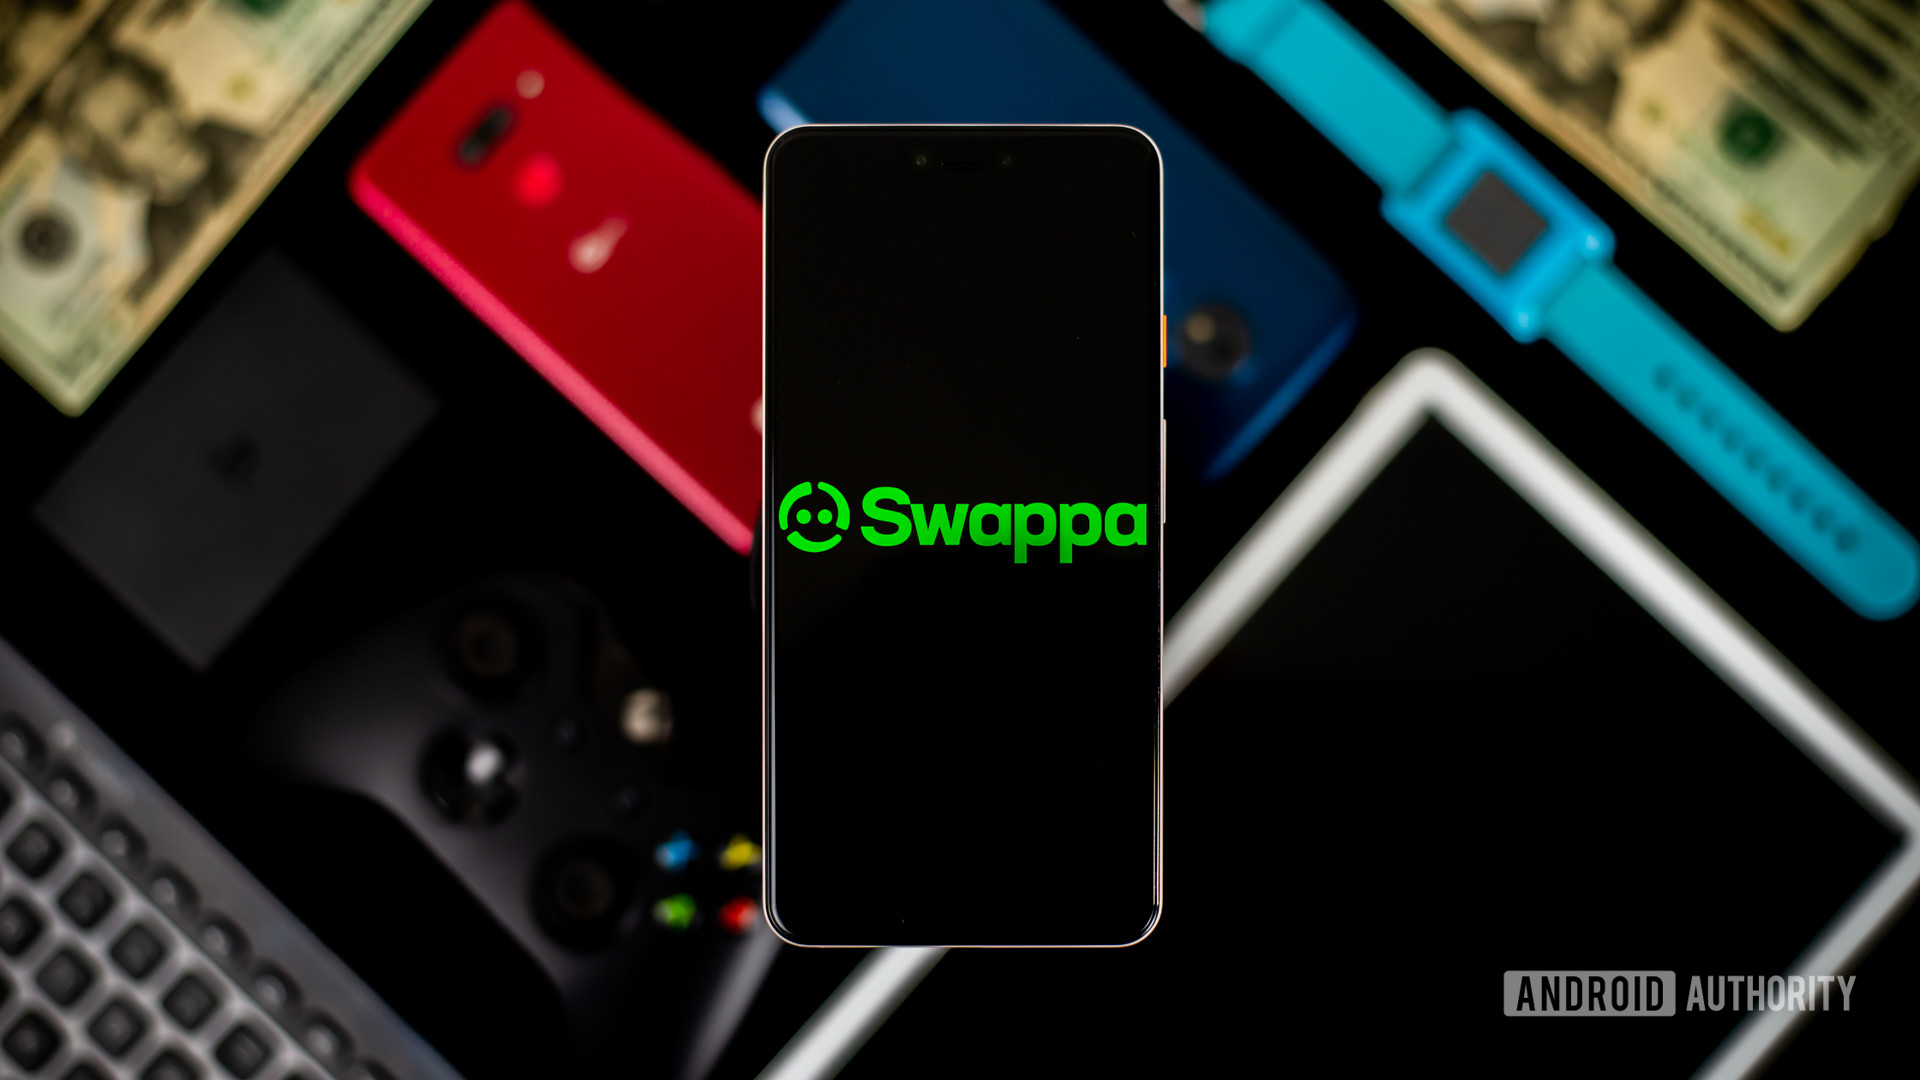 Swappa logo on smartphone with devices in background stock photo — How do I sell my used phone?